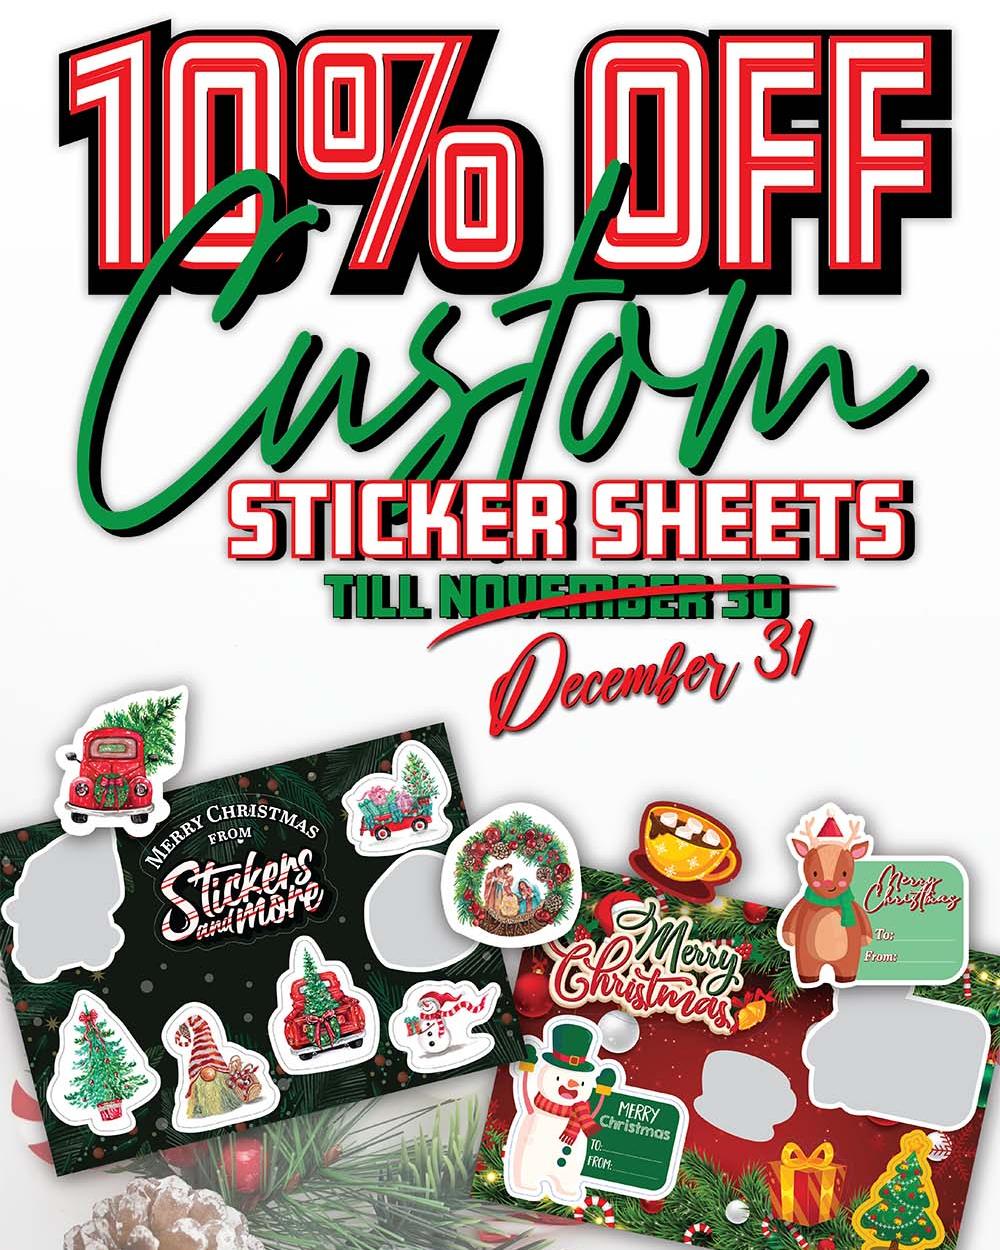 Merry Christmas Early! We are extending our sticker sheet promo through till the end of December. Don't miss out on this amazing opportunity. Sticker sheets are a fun way to promote and spread awareness of your brand. Email us and get your sticker sheet order started today! 
info@stickersandmore.com
#stickersheets #ACA American Camp Association Christian Camp and Conference Association @brewersassoc Brewers Association @acacamps @ccca.1963 #awesomestickershop #awesomestickers #holiday #promotion